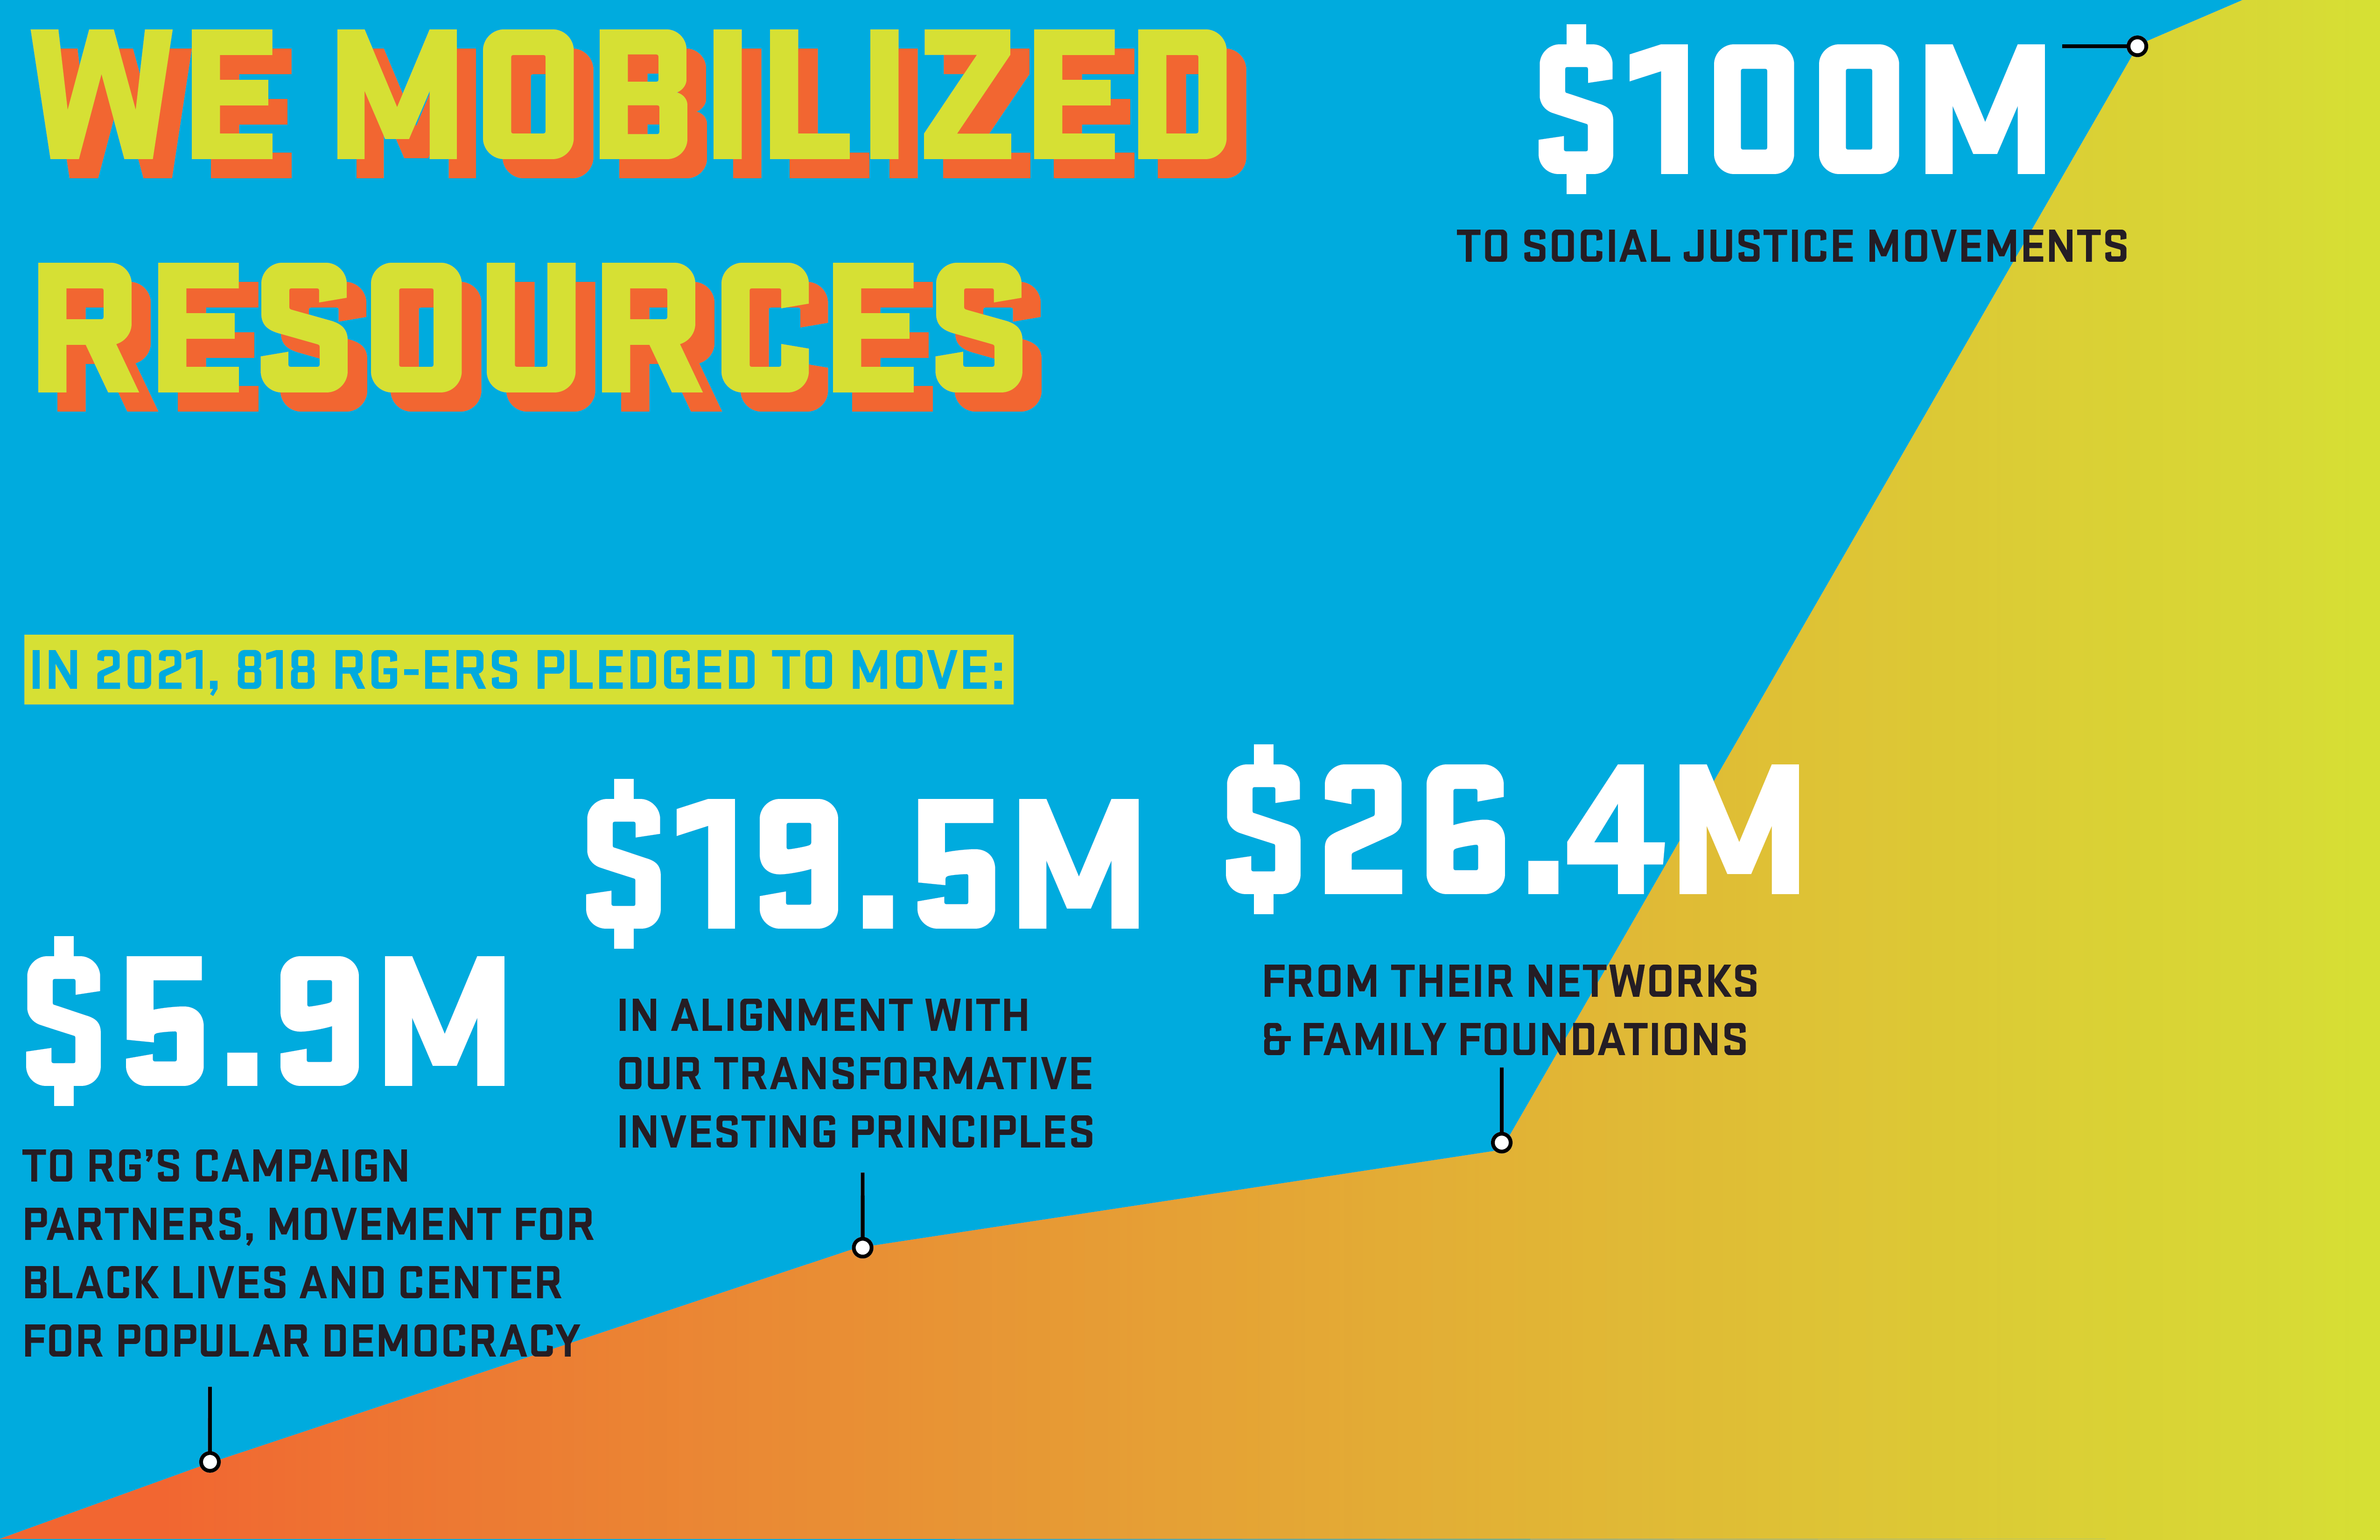 Give $100M to social justice movements Fundraise $26.4M from their networks (or via family foundations) Invest $19.5M in alignment with our Transformative Investing Principles Give $5.9M to RG’s campaign partners, Movement for Black Lives and Center for Popular Democracy